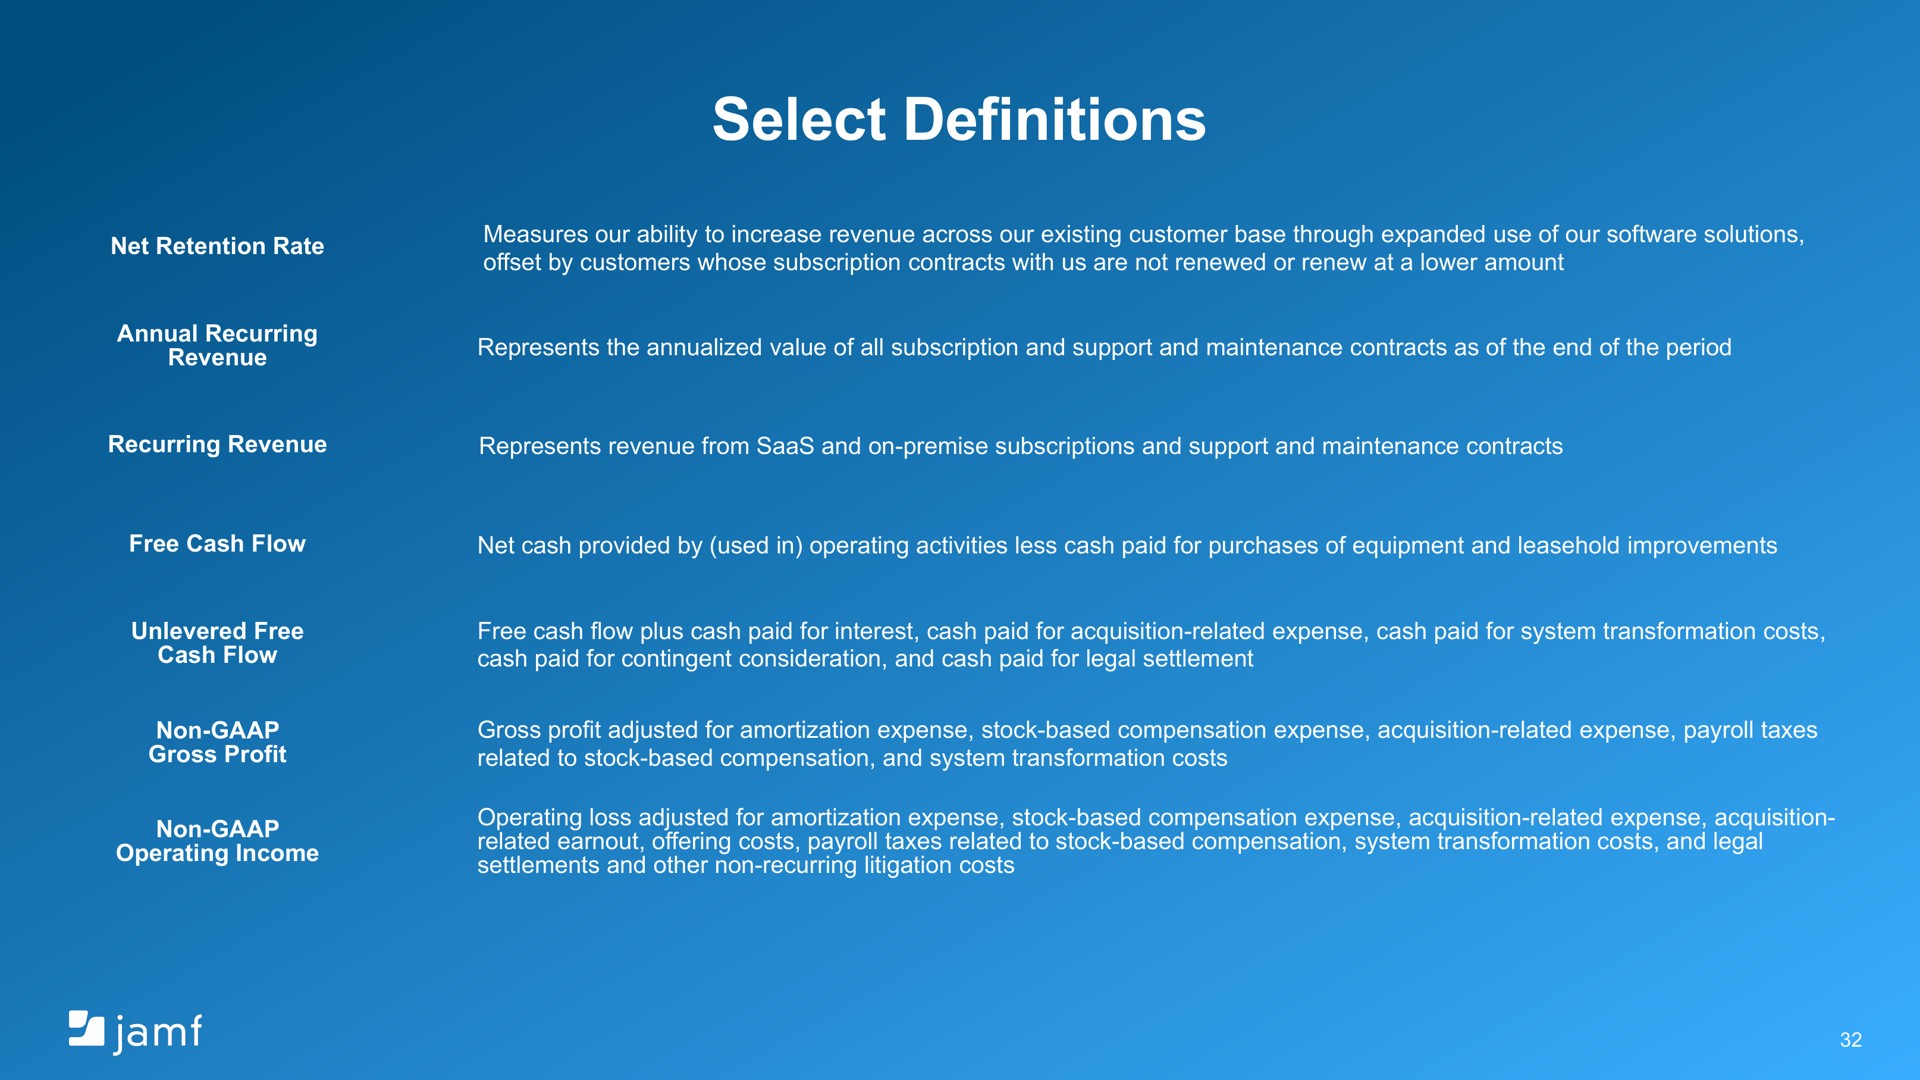 select definitions | Jamf